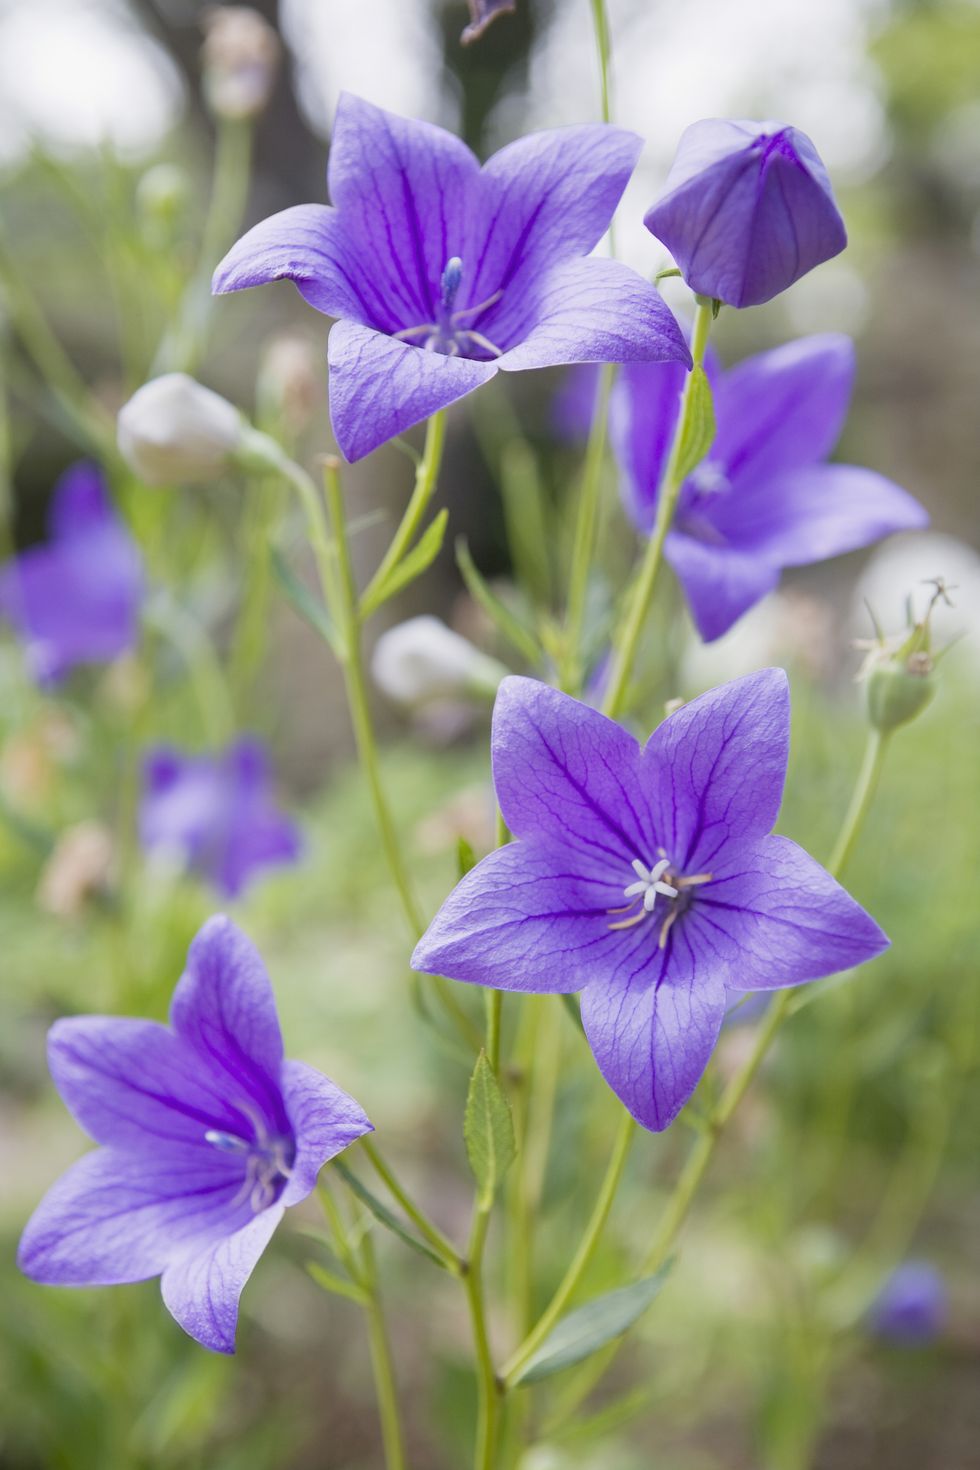 bell shaped small purple flowers that have a five point star shaped face on delicate stems in the garden